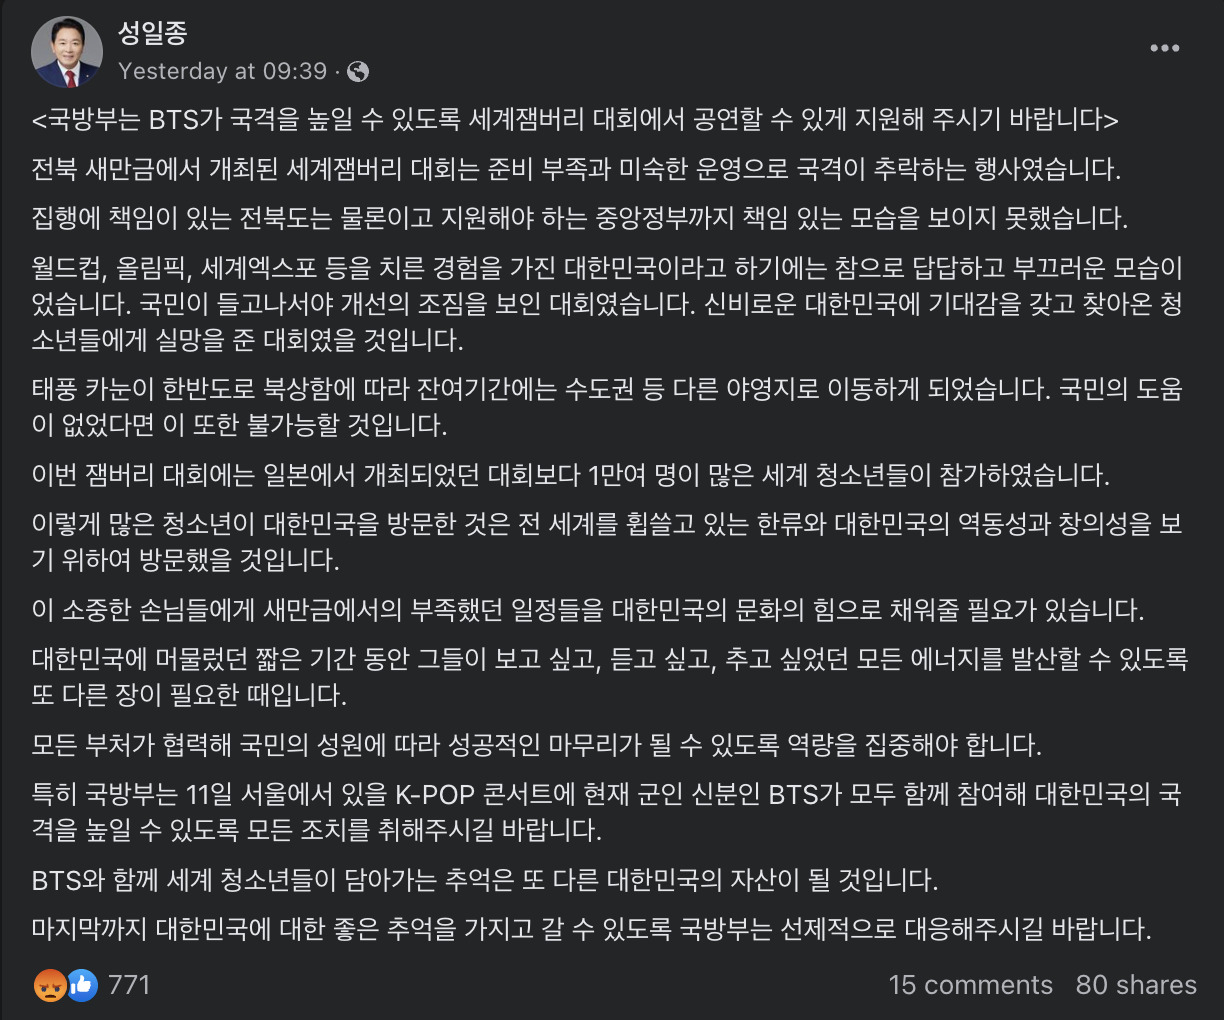 Rep. Sung Il-jong's Facebook post, requesting the Ministry of National Defense to send the two BTS members serving in the military to the World Scout Jamboree's K-pop concert on Friday. (Sung Il-jong's Facebook)